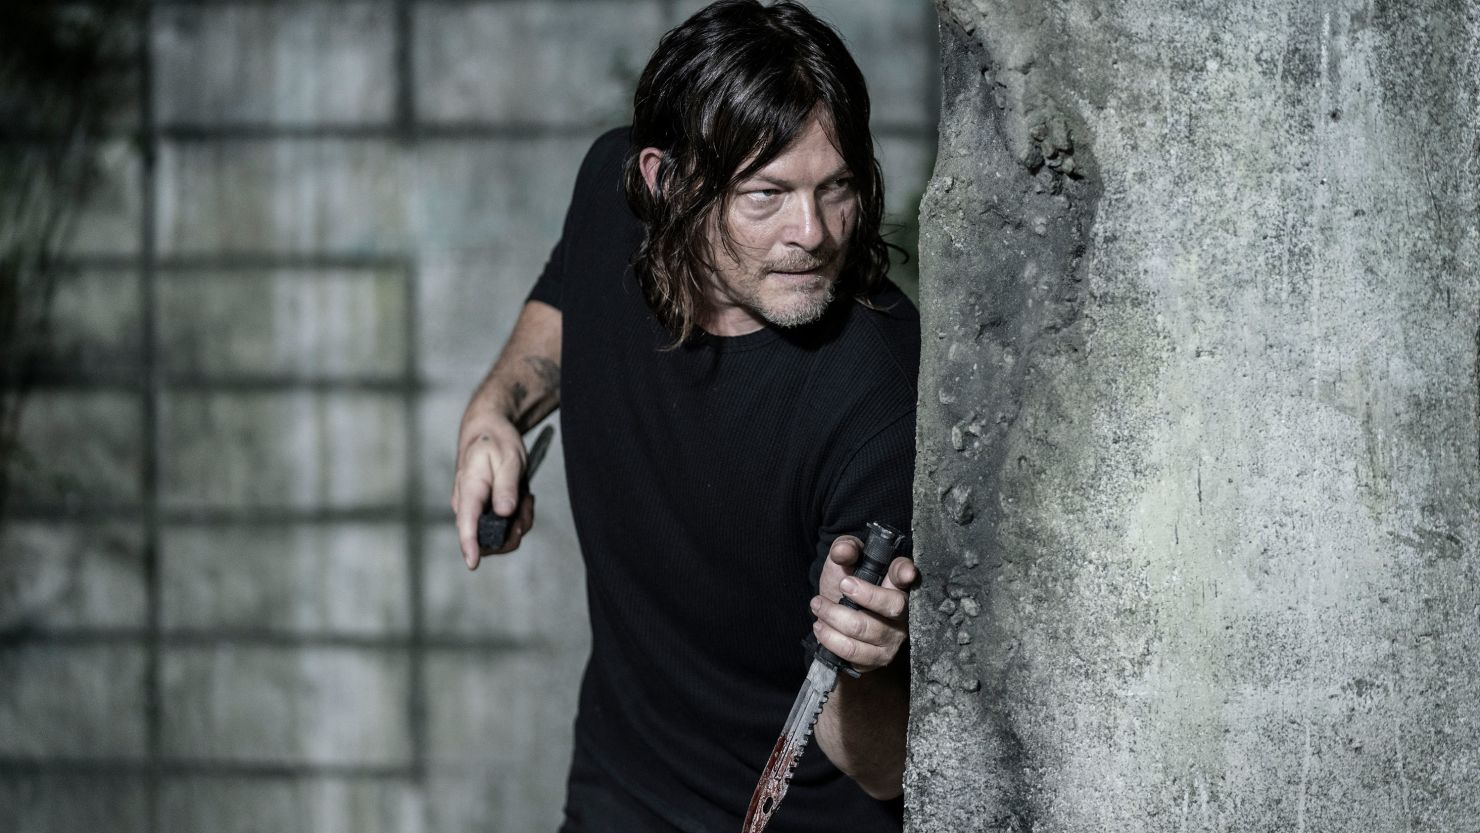 Norman Reedus as Daryl Dixon in 'The Walking Dead,' a character whose story will continue in a spinoff series.